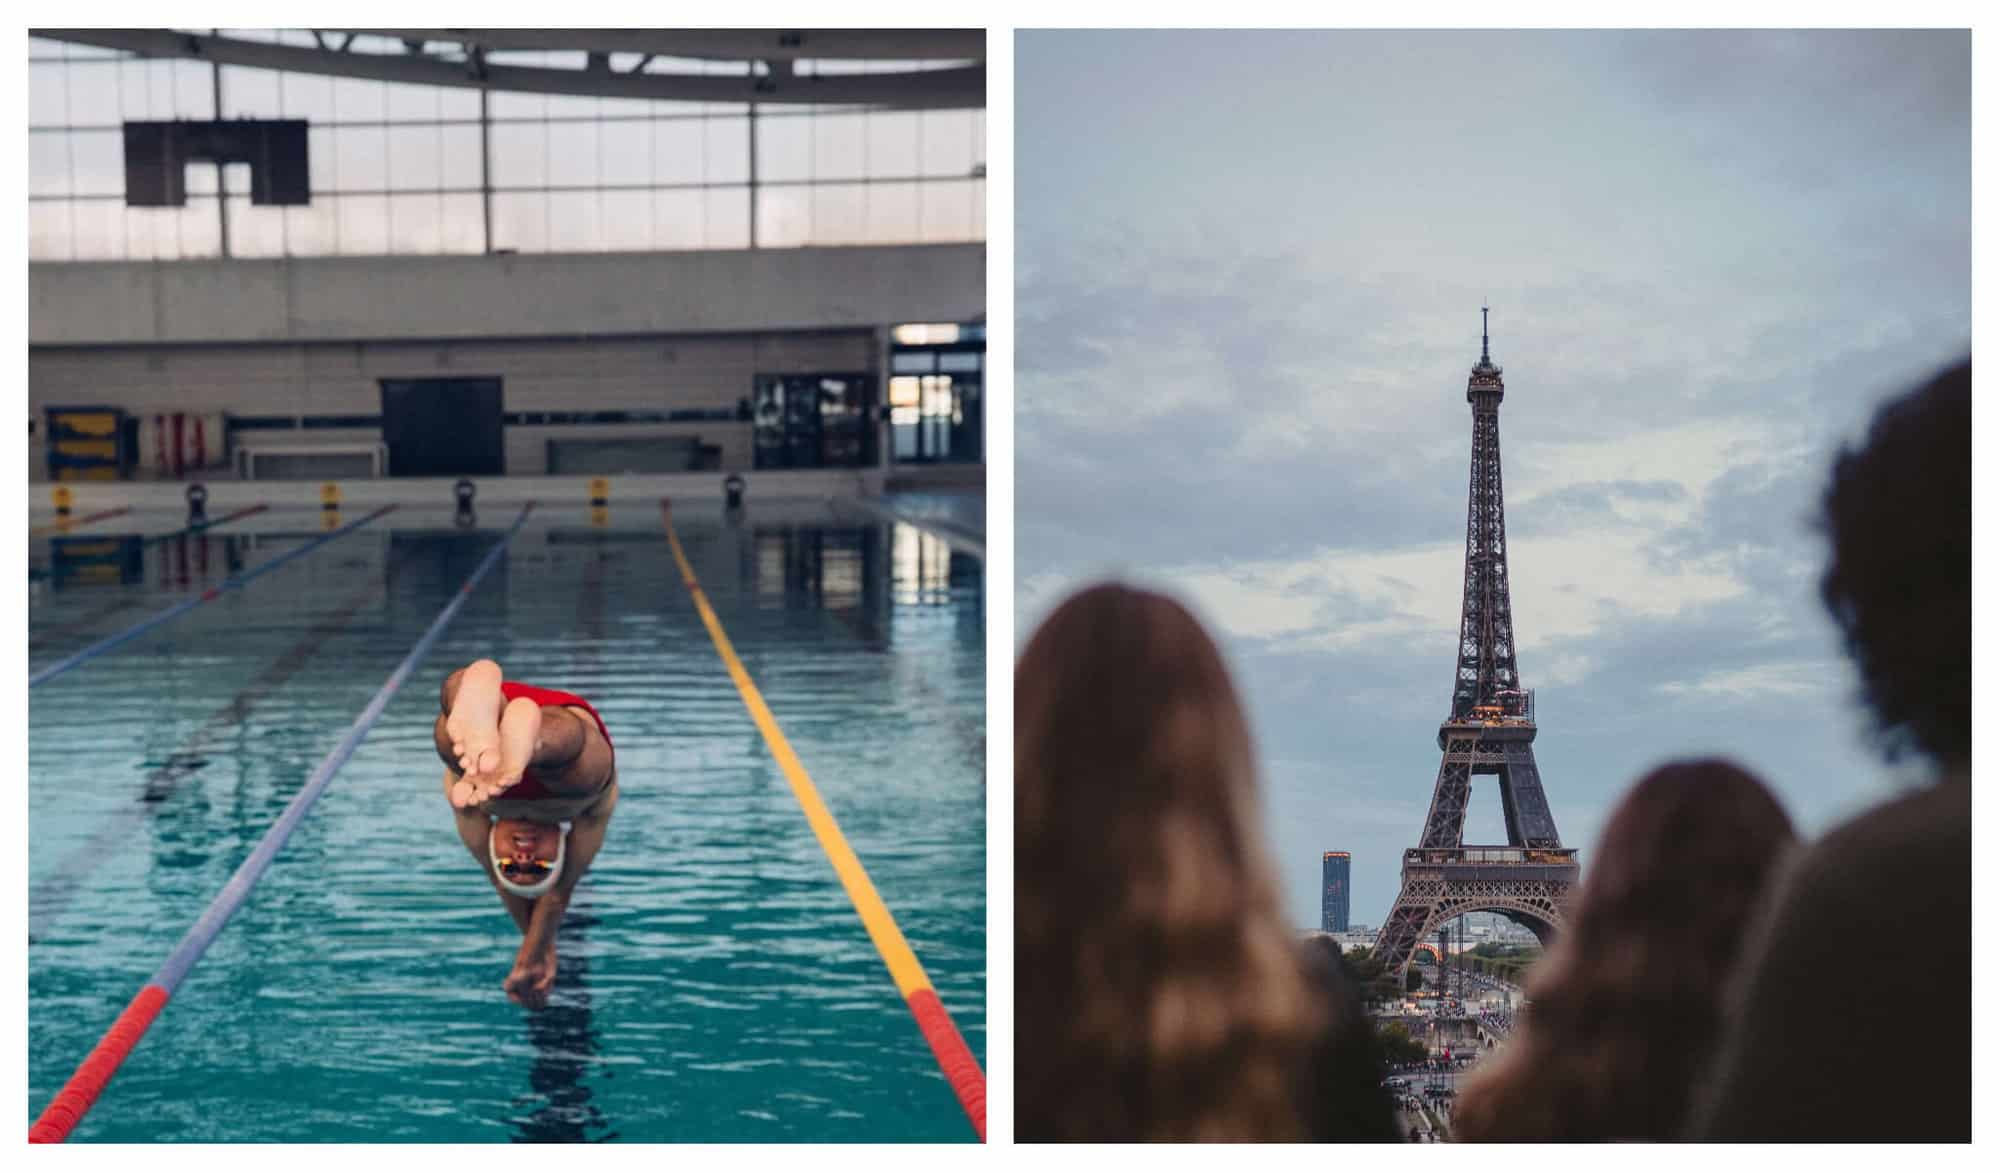 Left: A swimmer in red trunks dives into a blue olympic lap pool. Right: 3 onlookers stare at the Eiffel Tower and the gloomy sky.